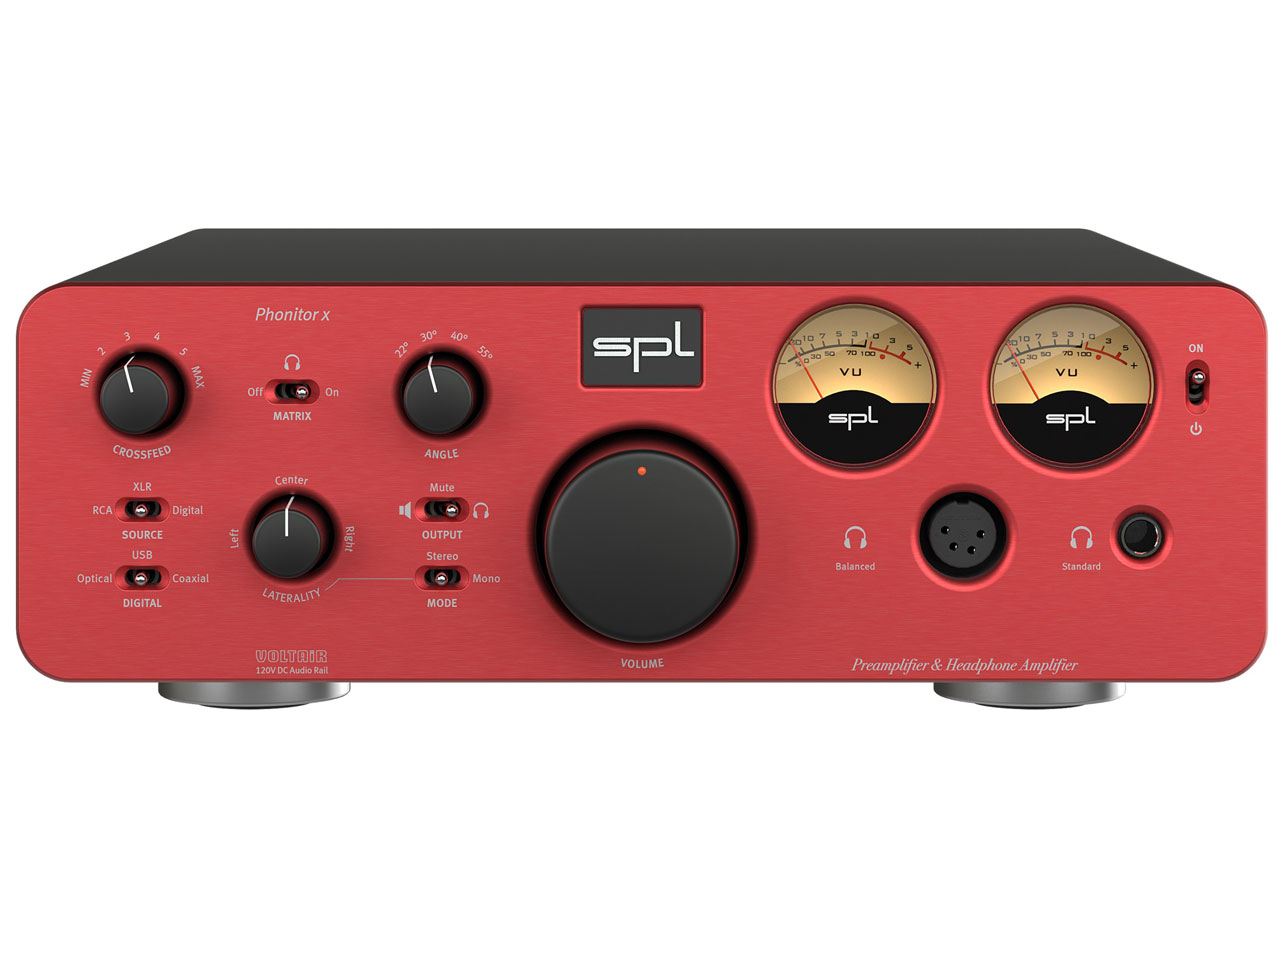 Phonitor x With DAC768xs [Red]